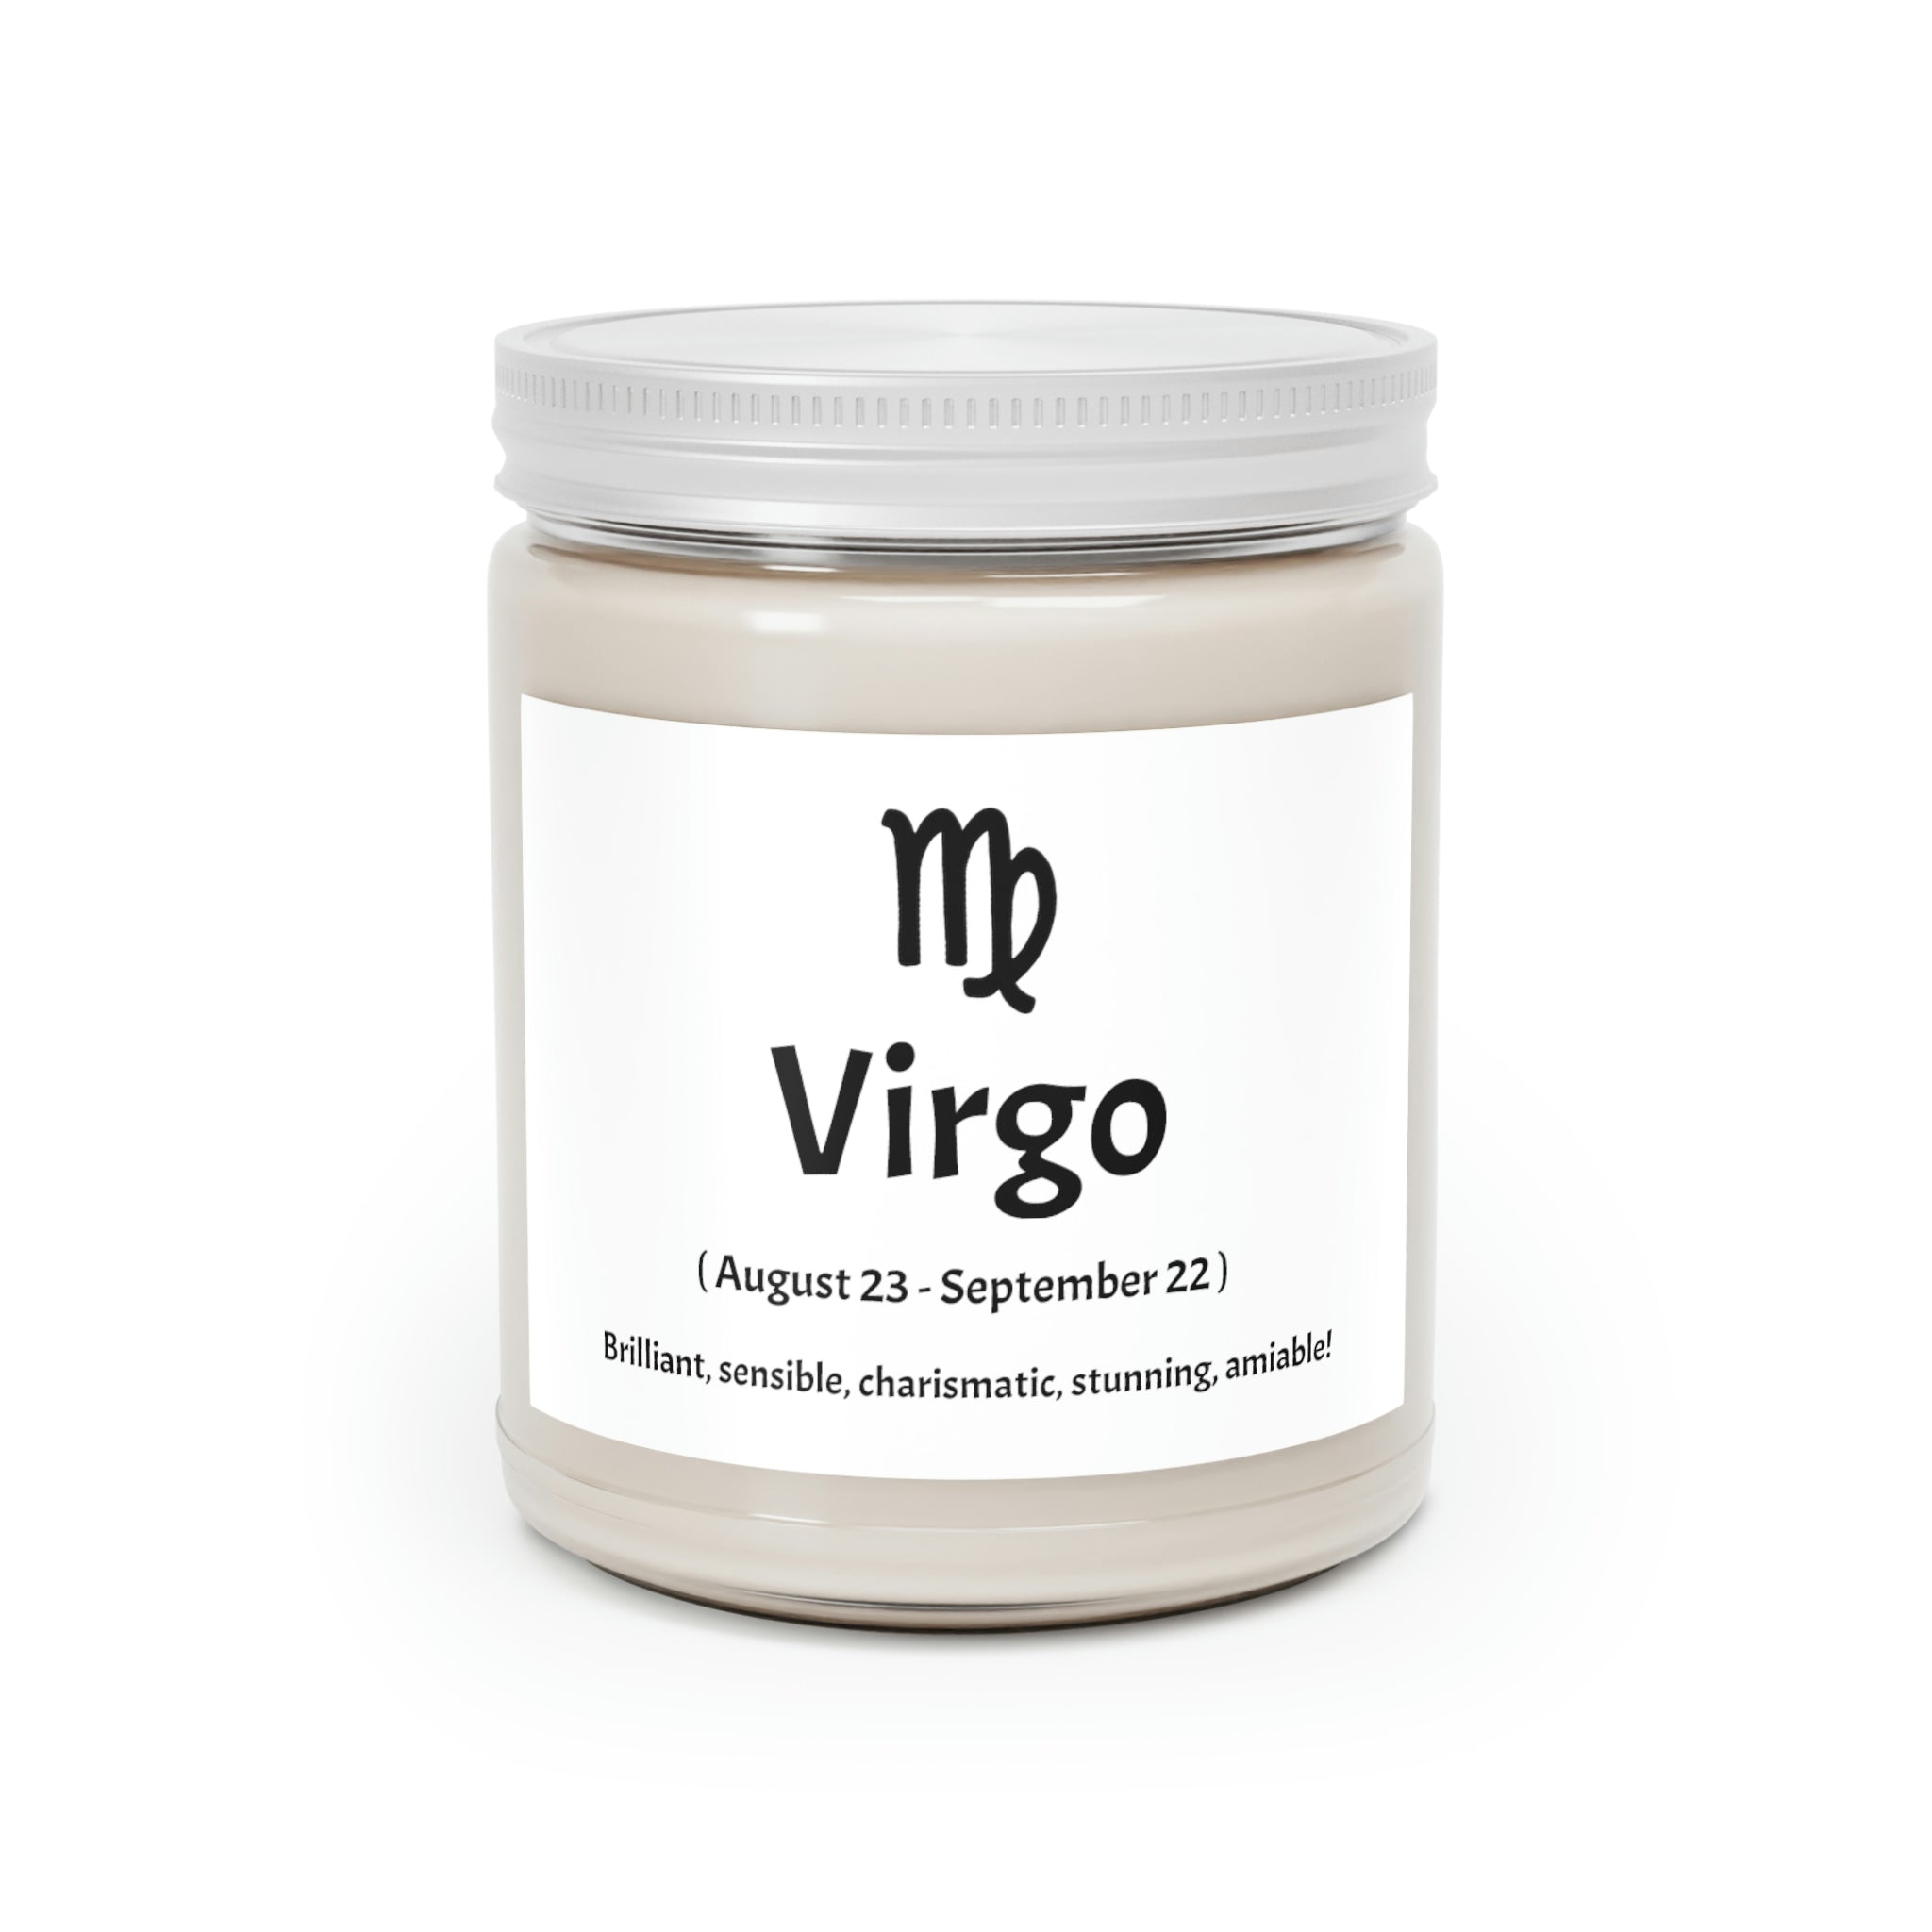 Virgo Scented Candle